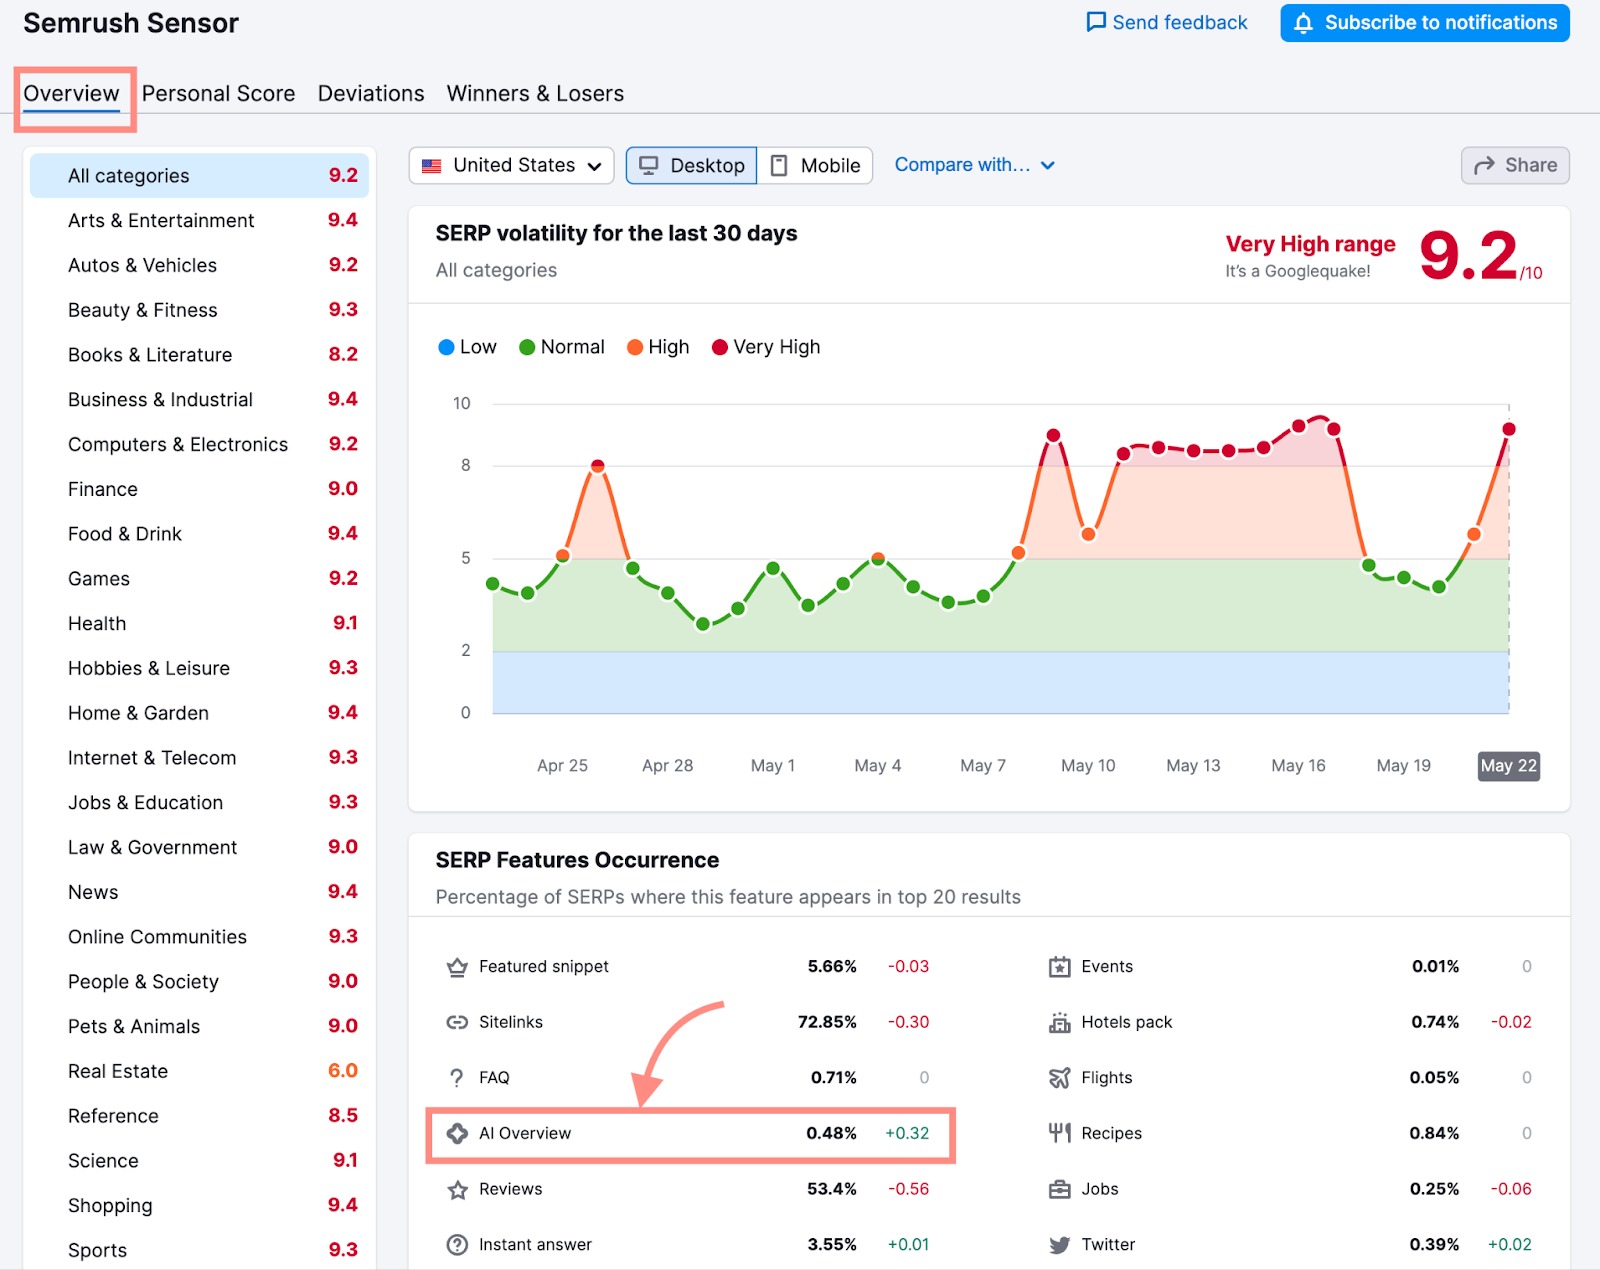 An example of Semrush Sensor Overview report. The name of the tab is highlighted, as well as AI Overview metrics in the SERP Features Occurrence widget below the SERP volatility trend graph.